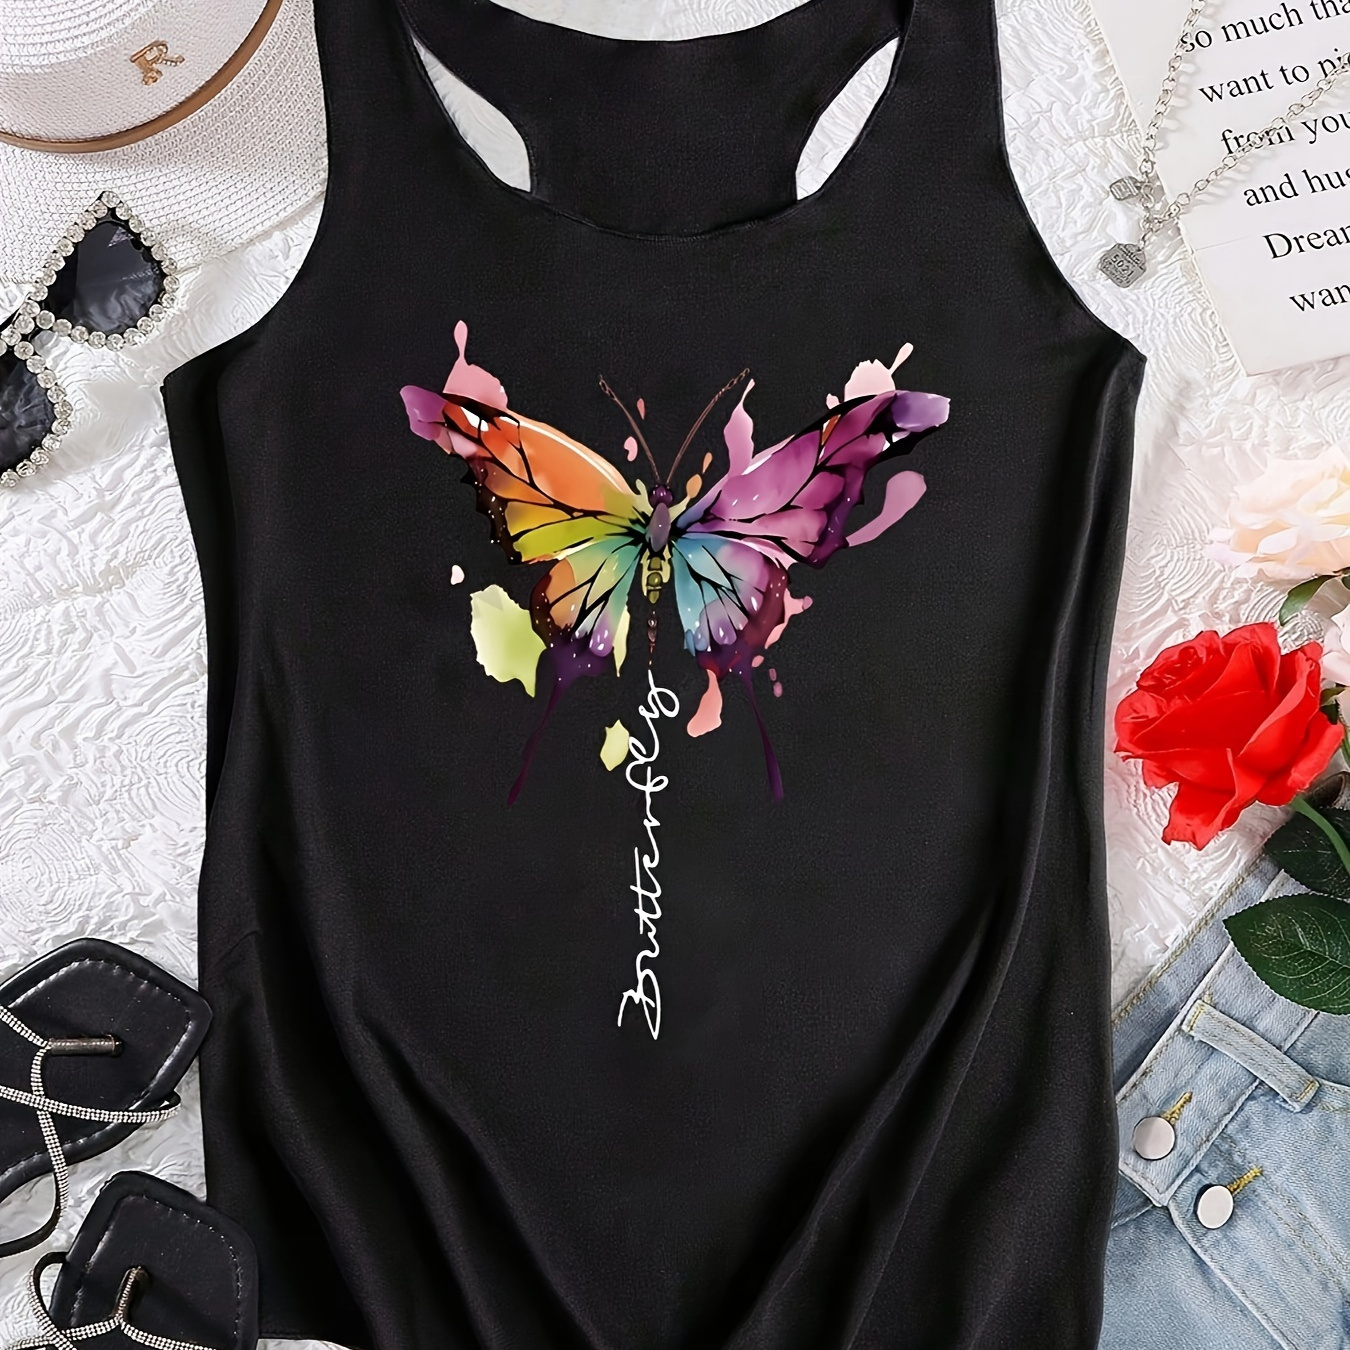 

Butterfly Print Crew Neck Tank Top, Casual Sleeveless Tank Top For Spring & Summer, Women's Clothing